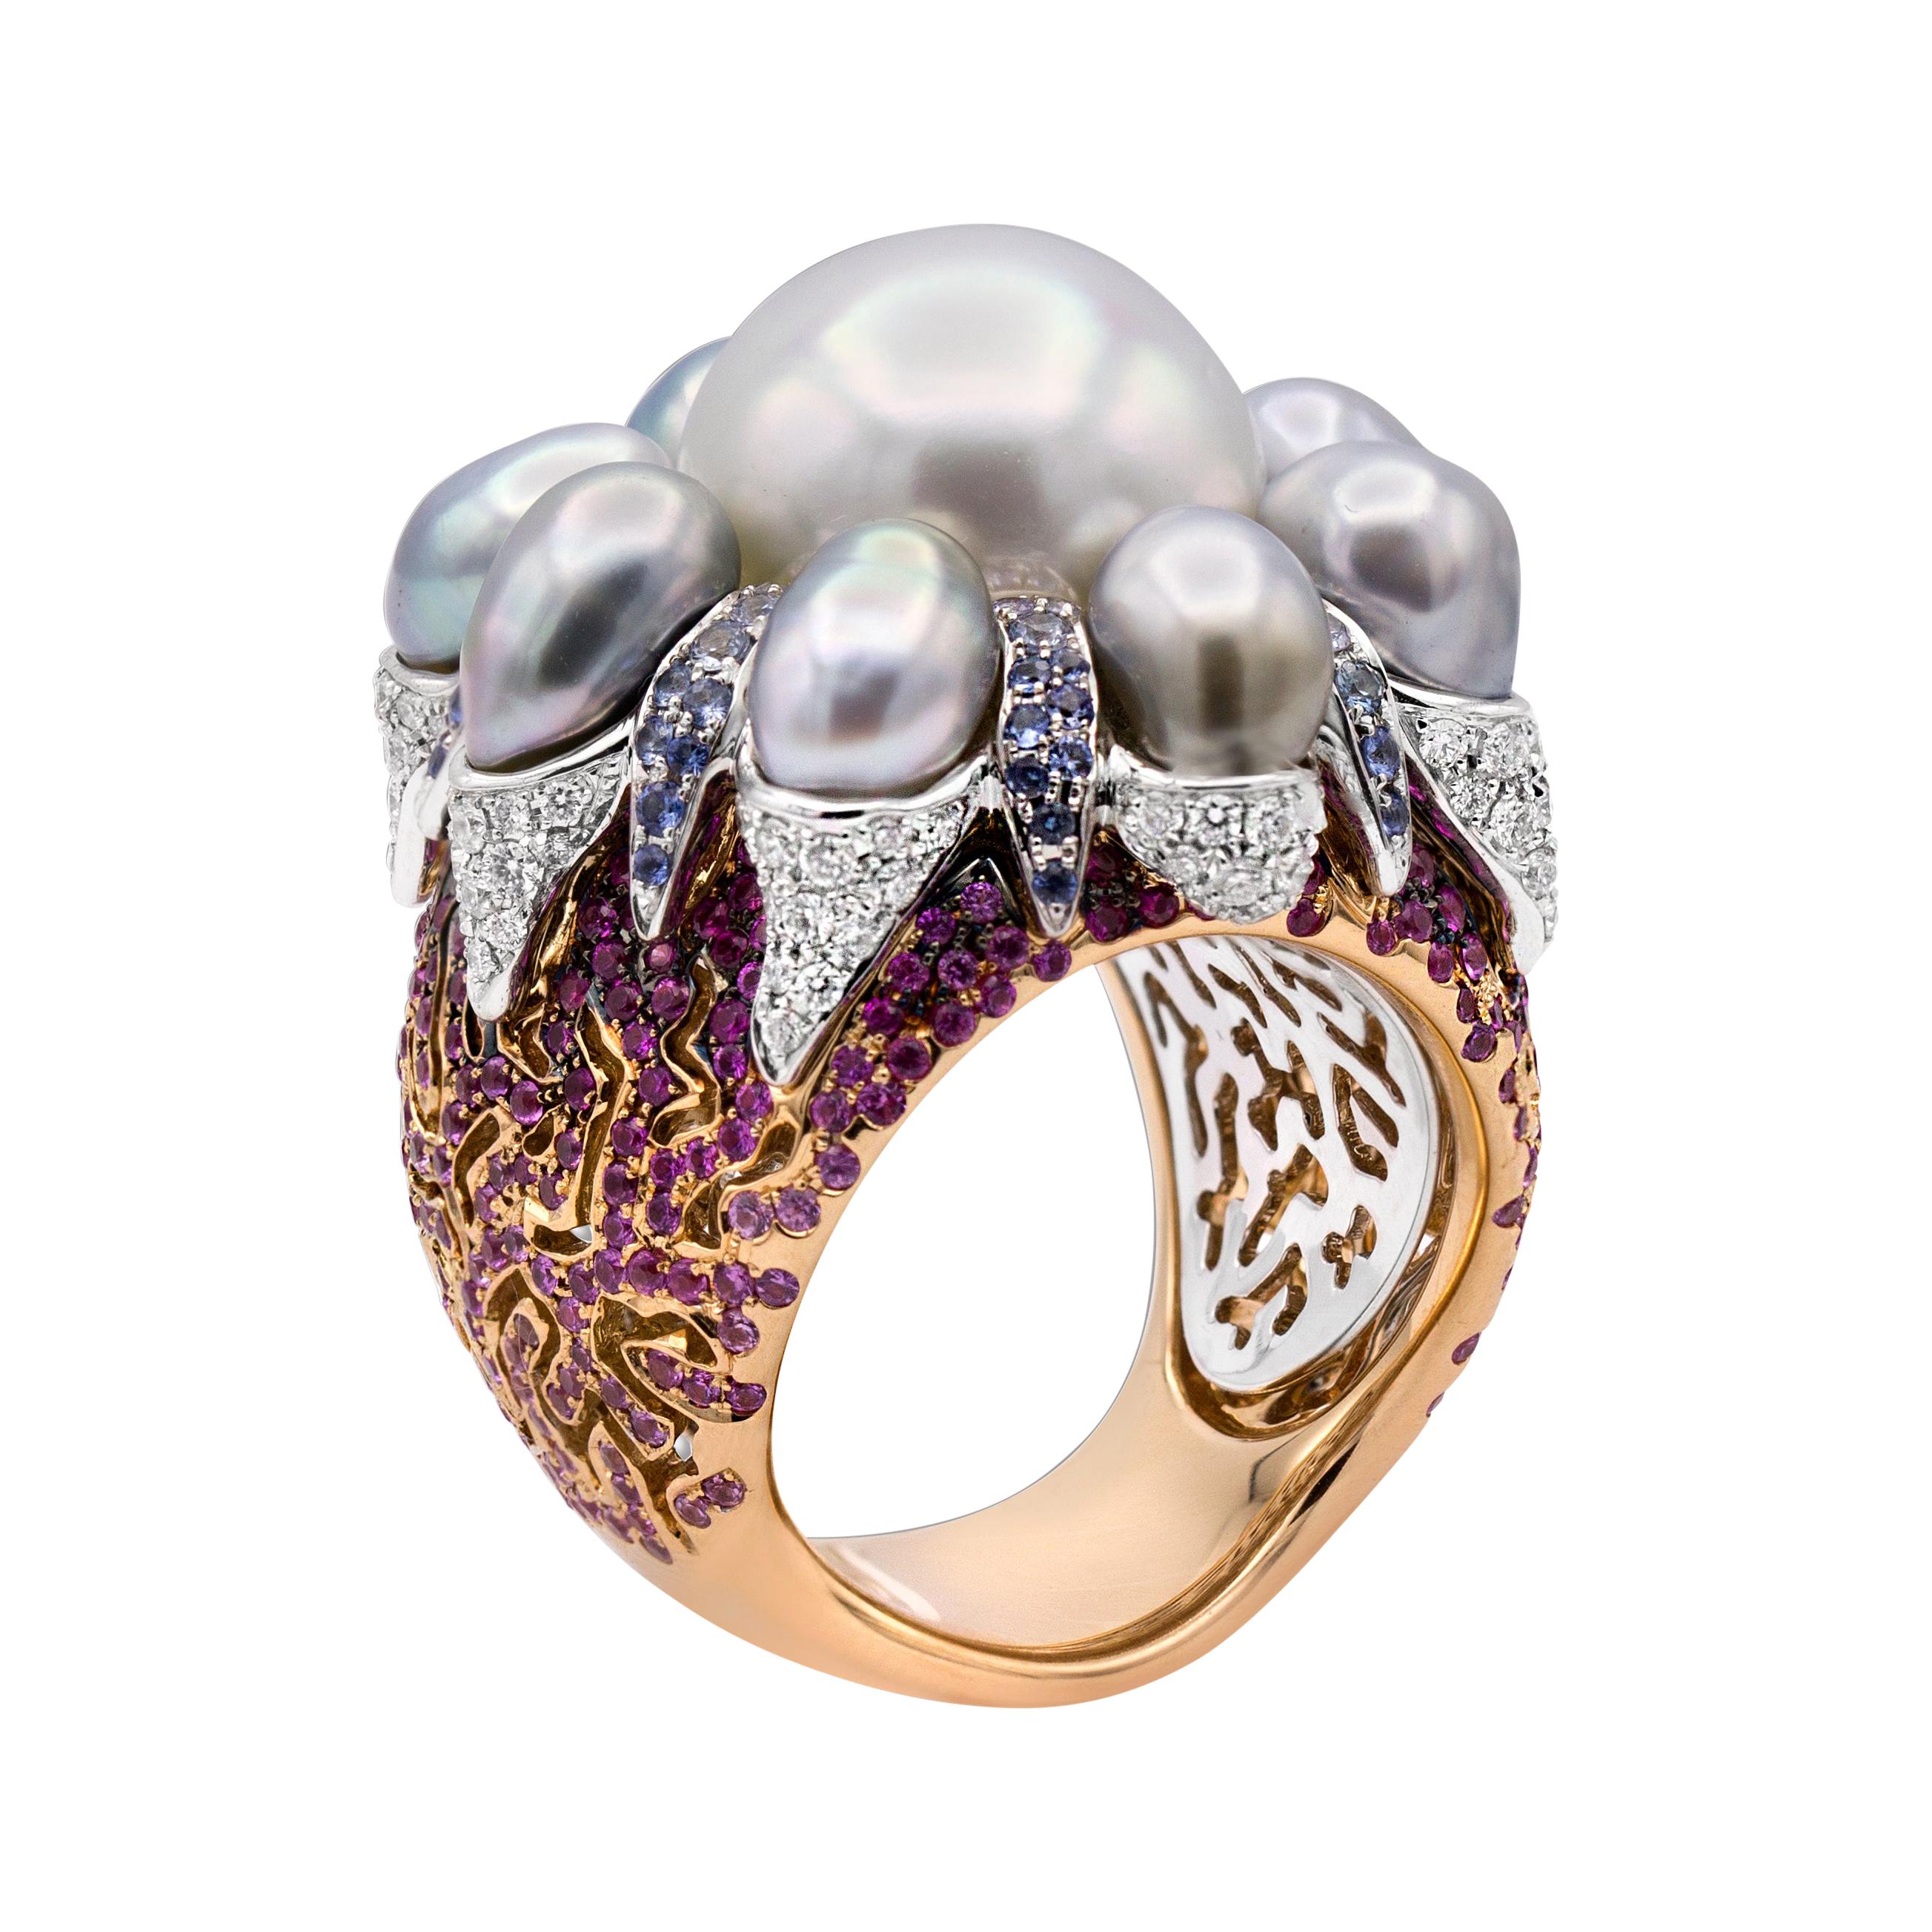 18kt White and Rose Gold, White Diamonds, Blue & Pink Sapphires, Pearls, Ring For Sale